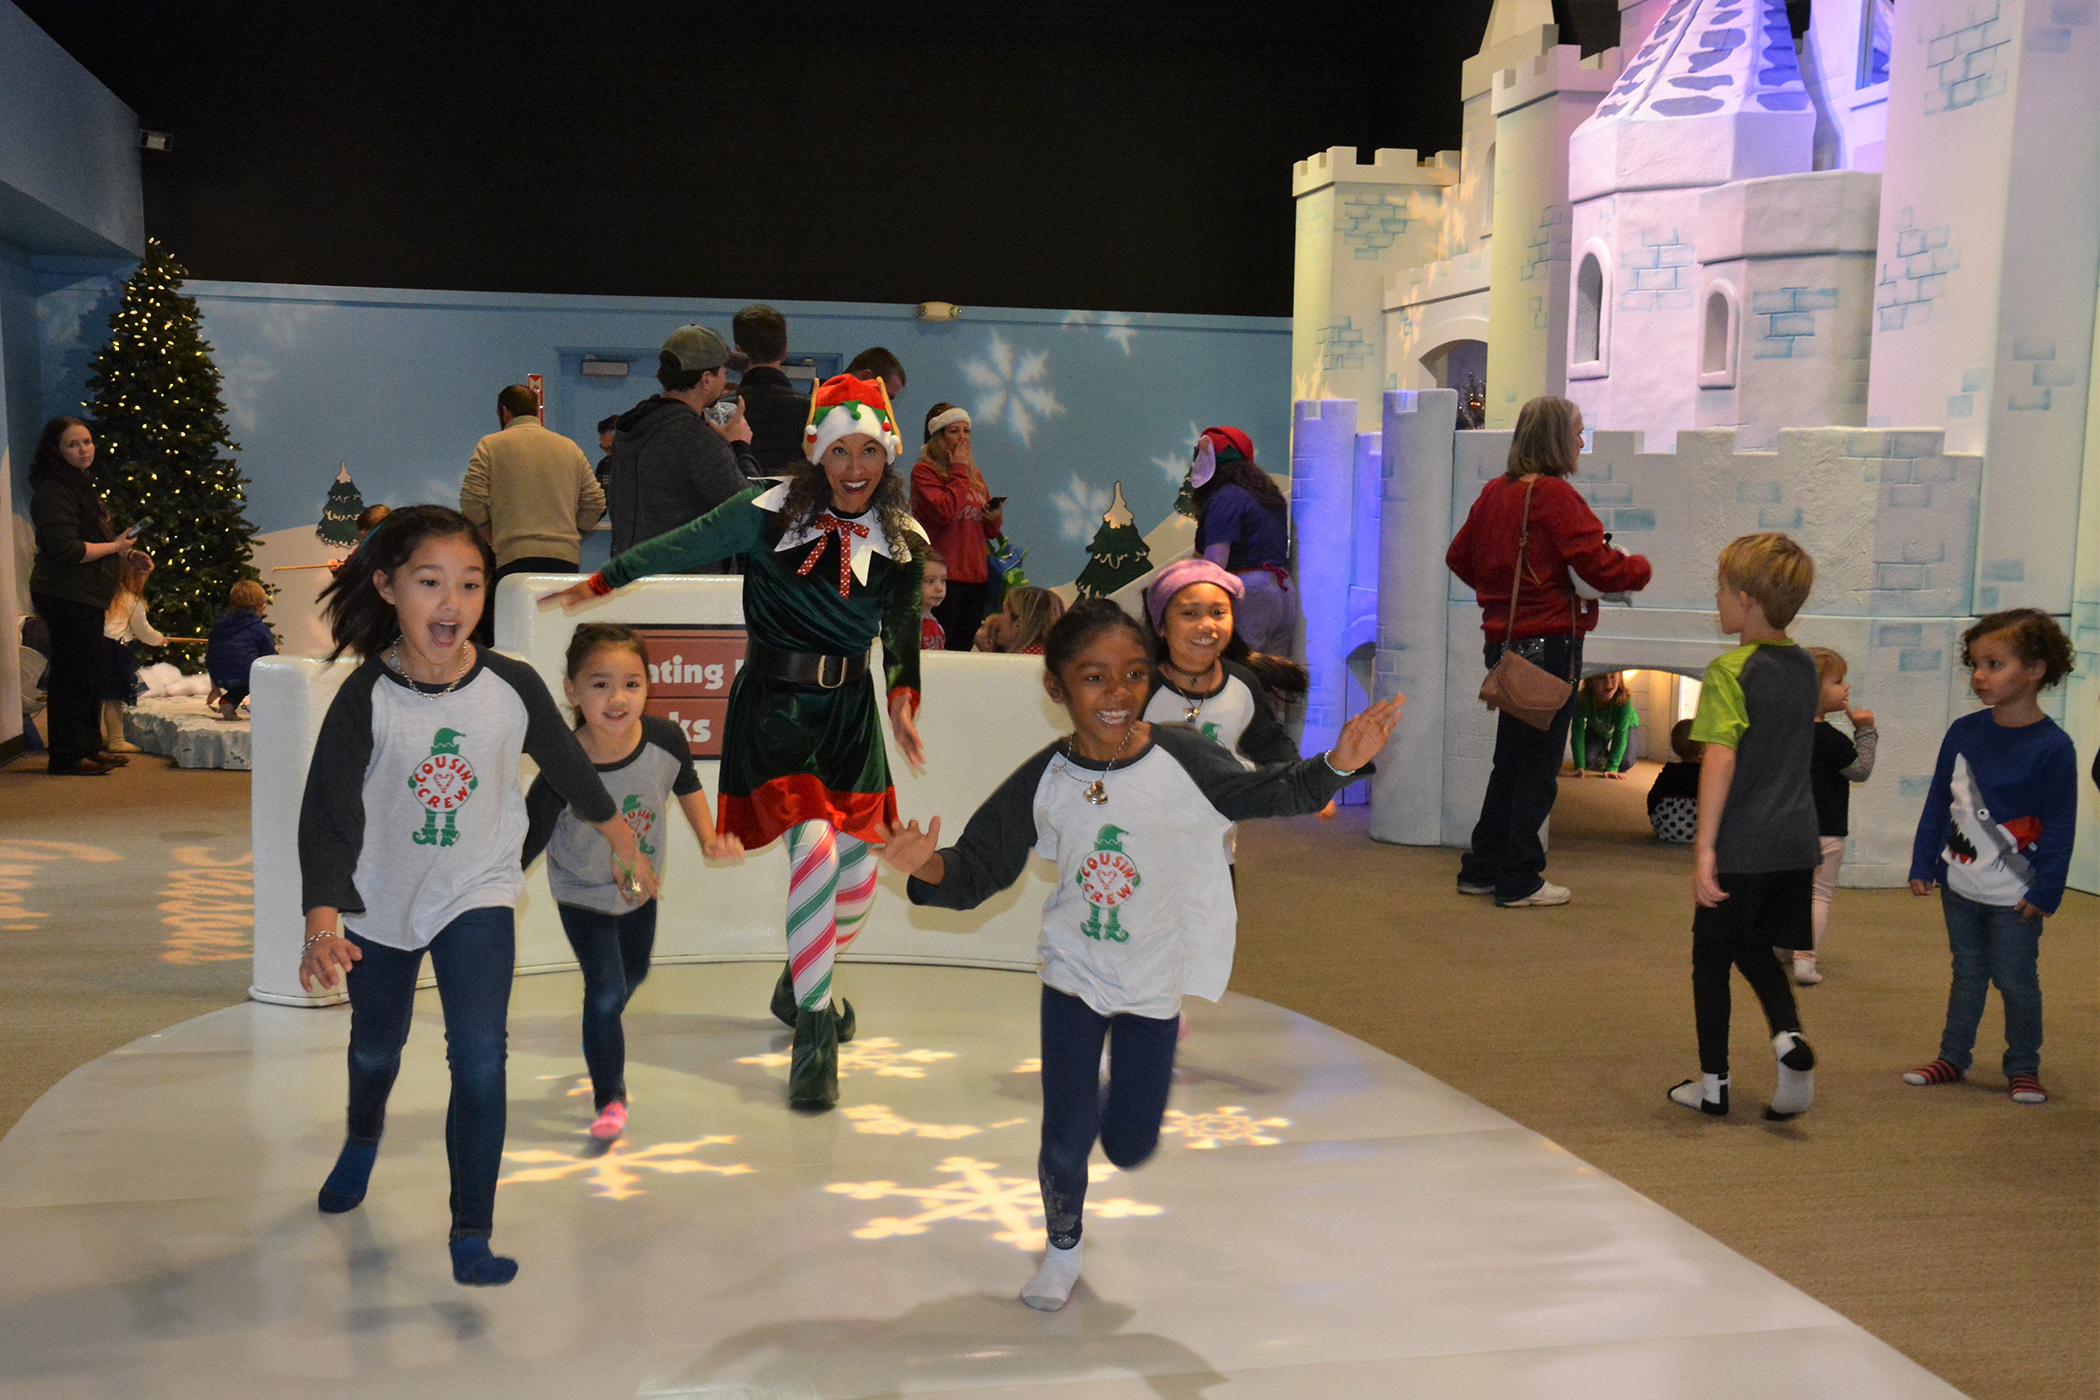 Race past ice castles to Santa while faux skating at the world's largest children's museum.  Skate, sing, and see Santa in one trip at The Children's Museum of Indianapolis.  Santa's Big Arrival at Th